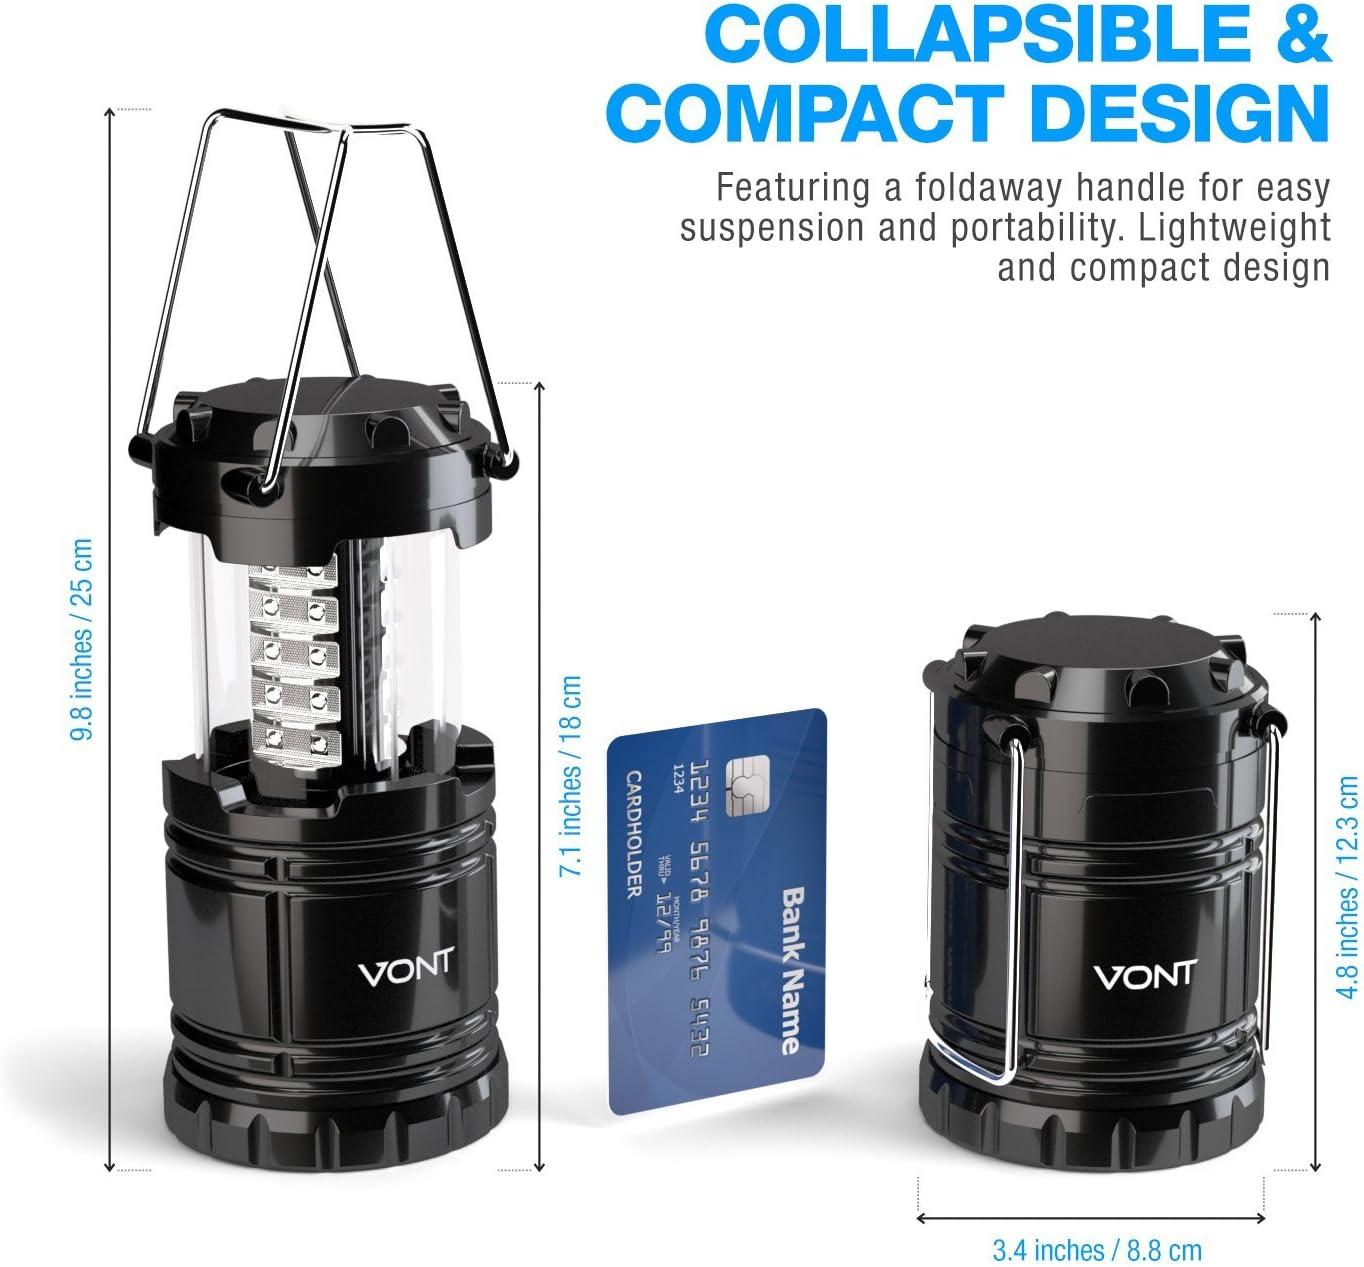 AuKvi 2 Pack LED Camping Lantern - Magnetic Base, 500 Lumens,Collapsible,As  Seen on TV LED Lanterns for Hurricane, Emergency,Storms